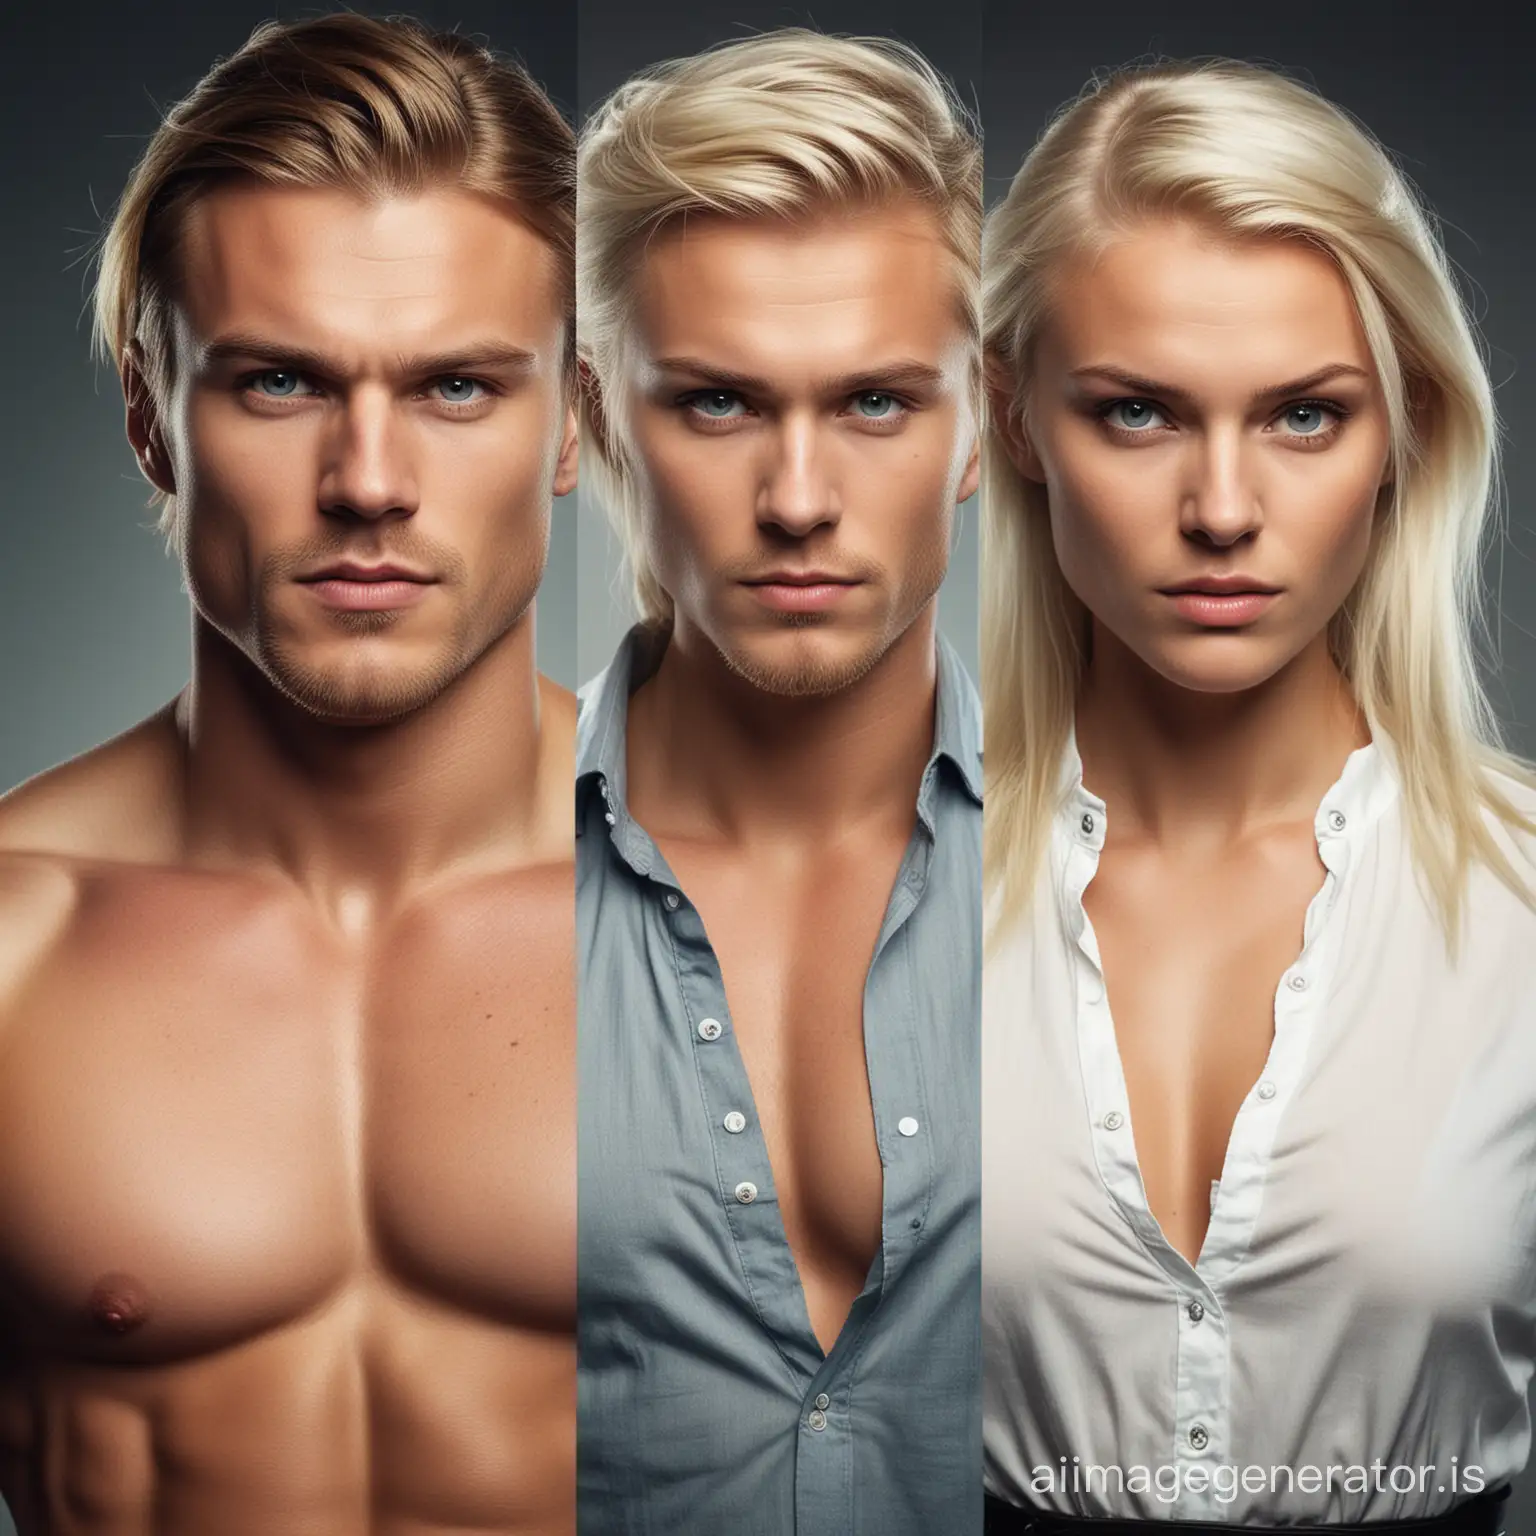 Nordic-Men-and-Women-Displaying-Confidence-and-Physical-Prowess